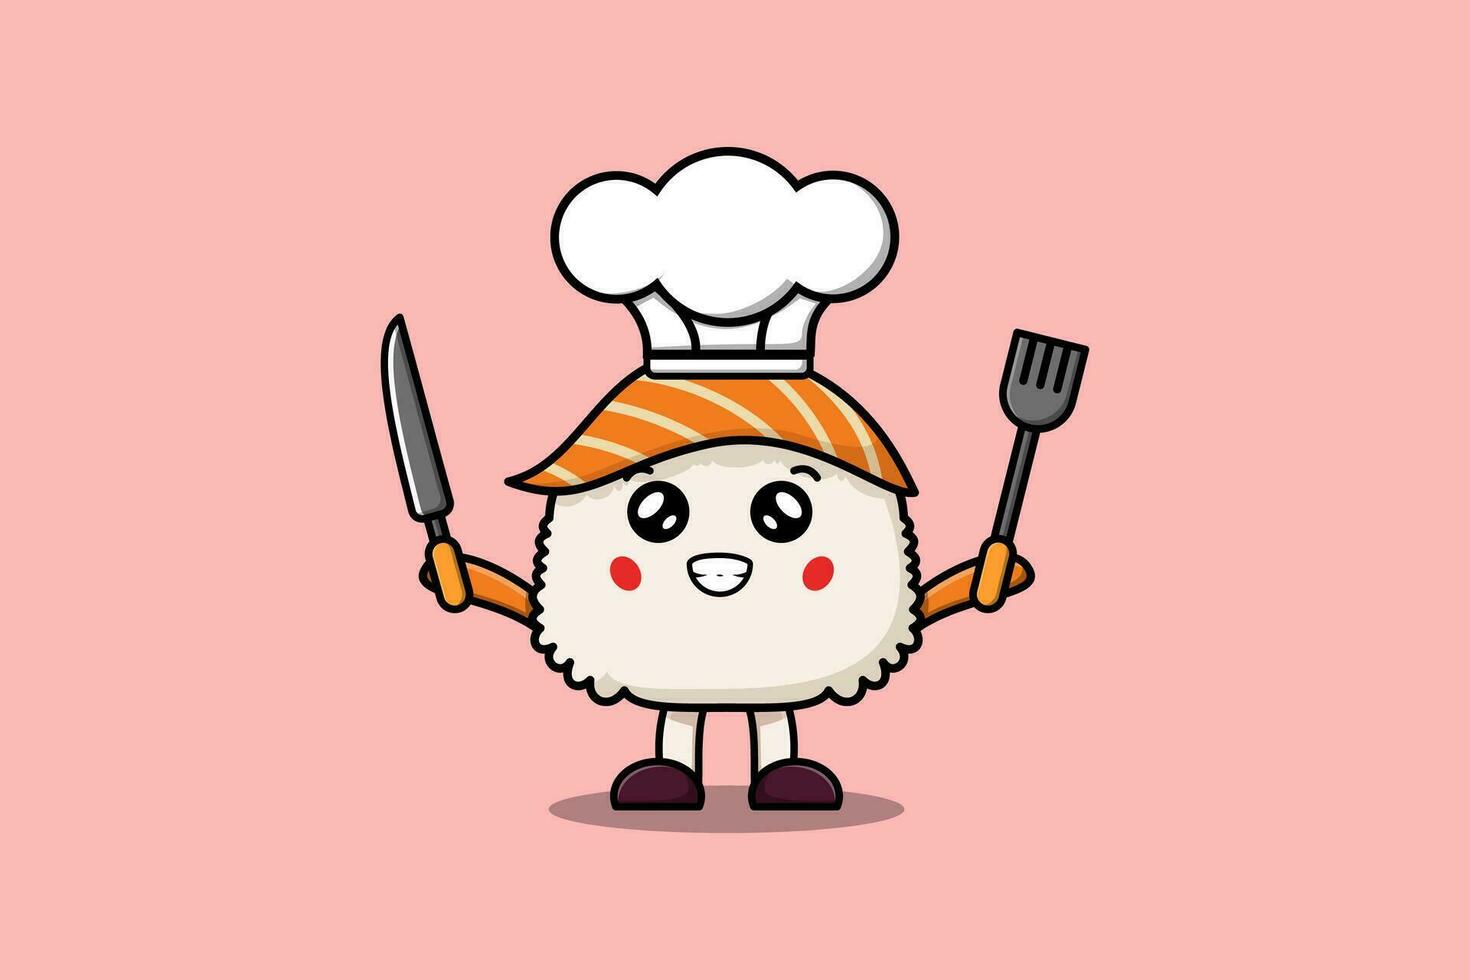 Cute cartoon Sushi chef holding knife and fork vector